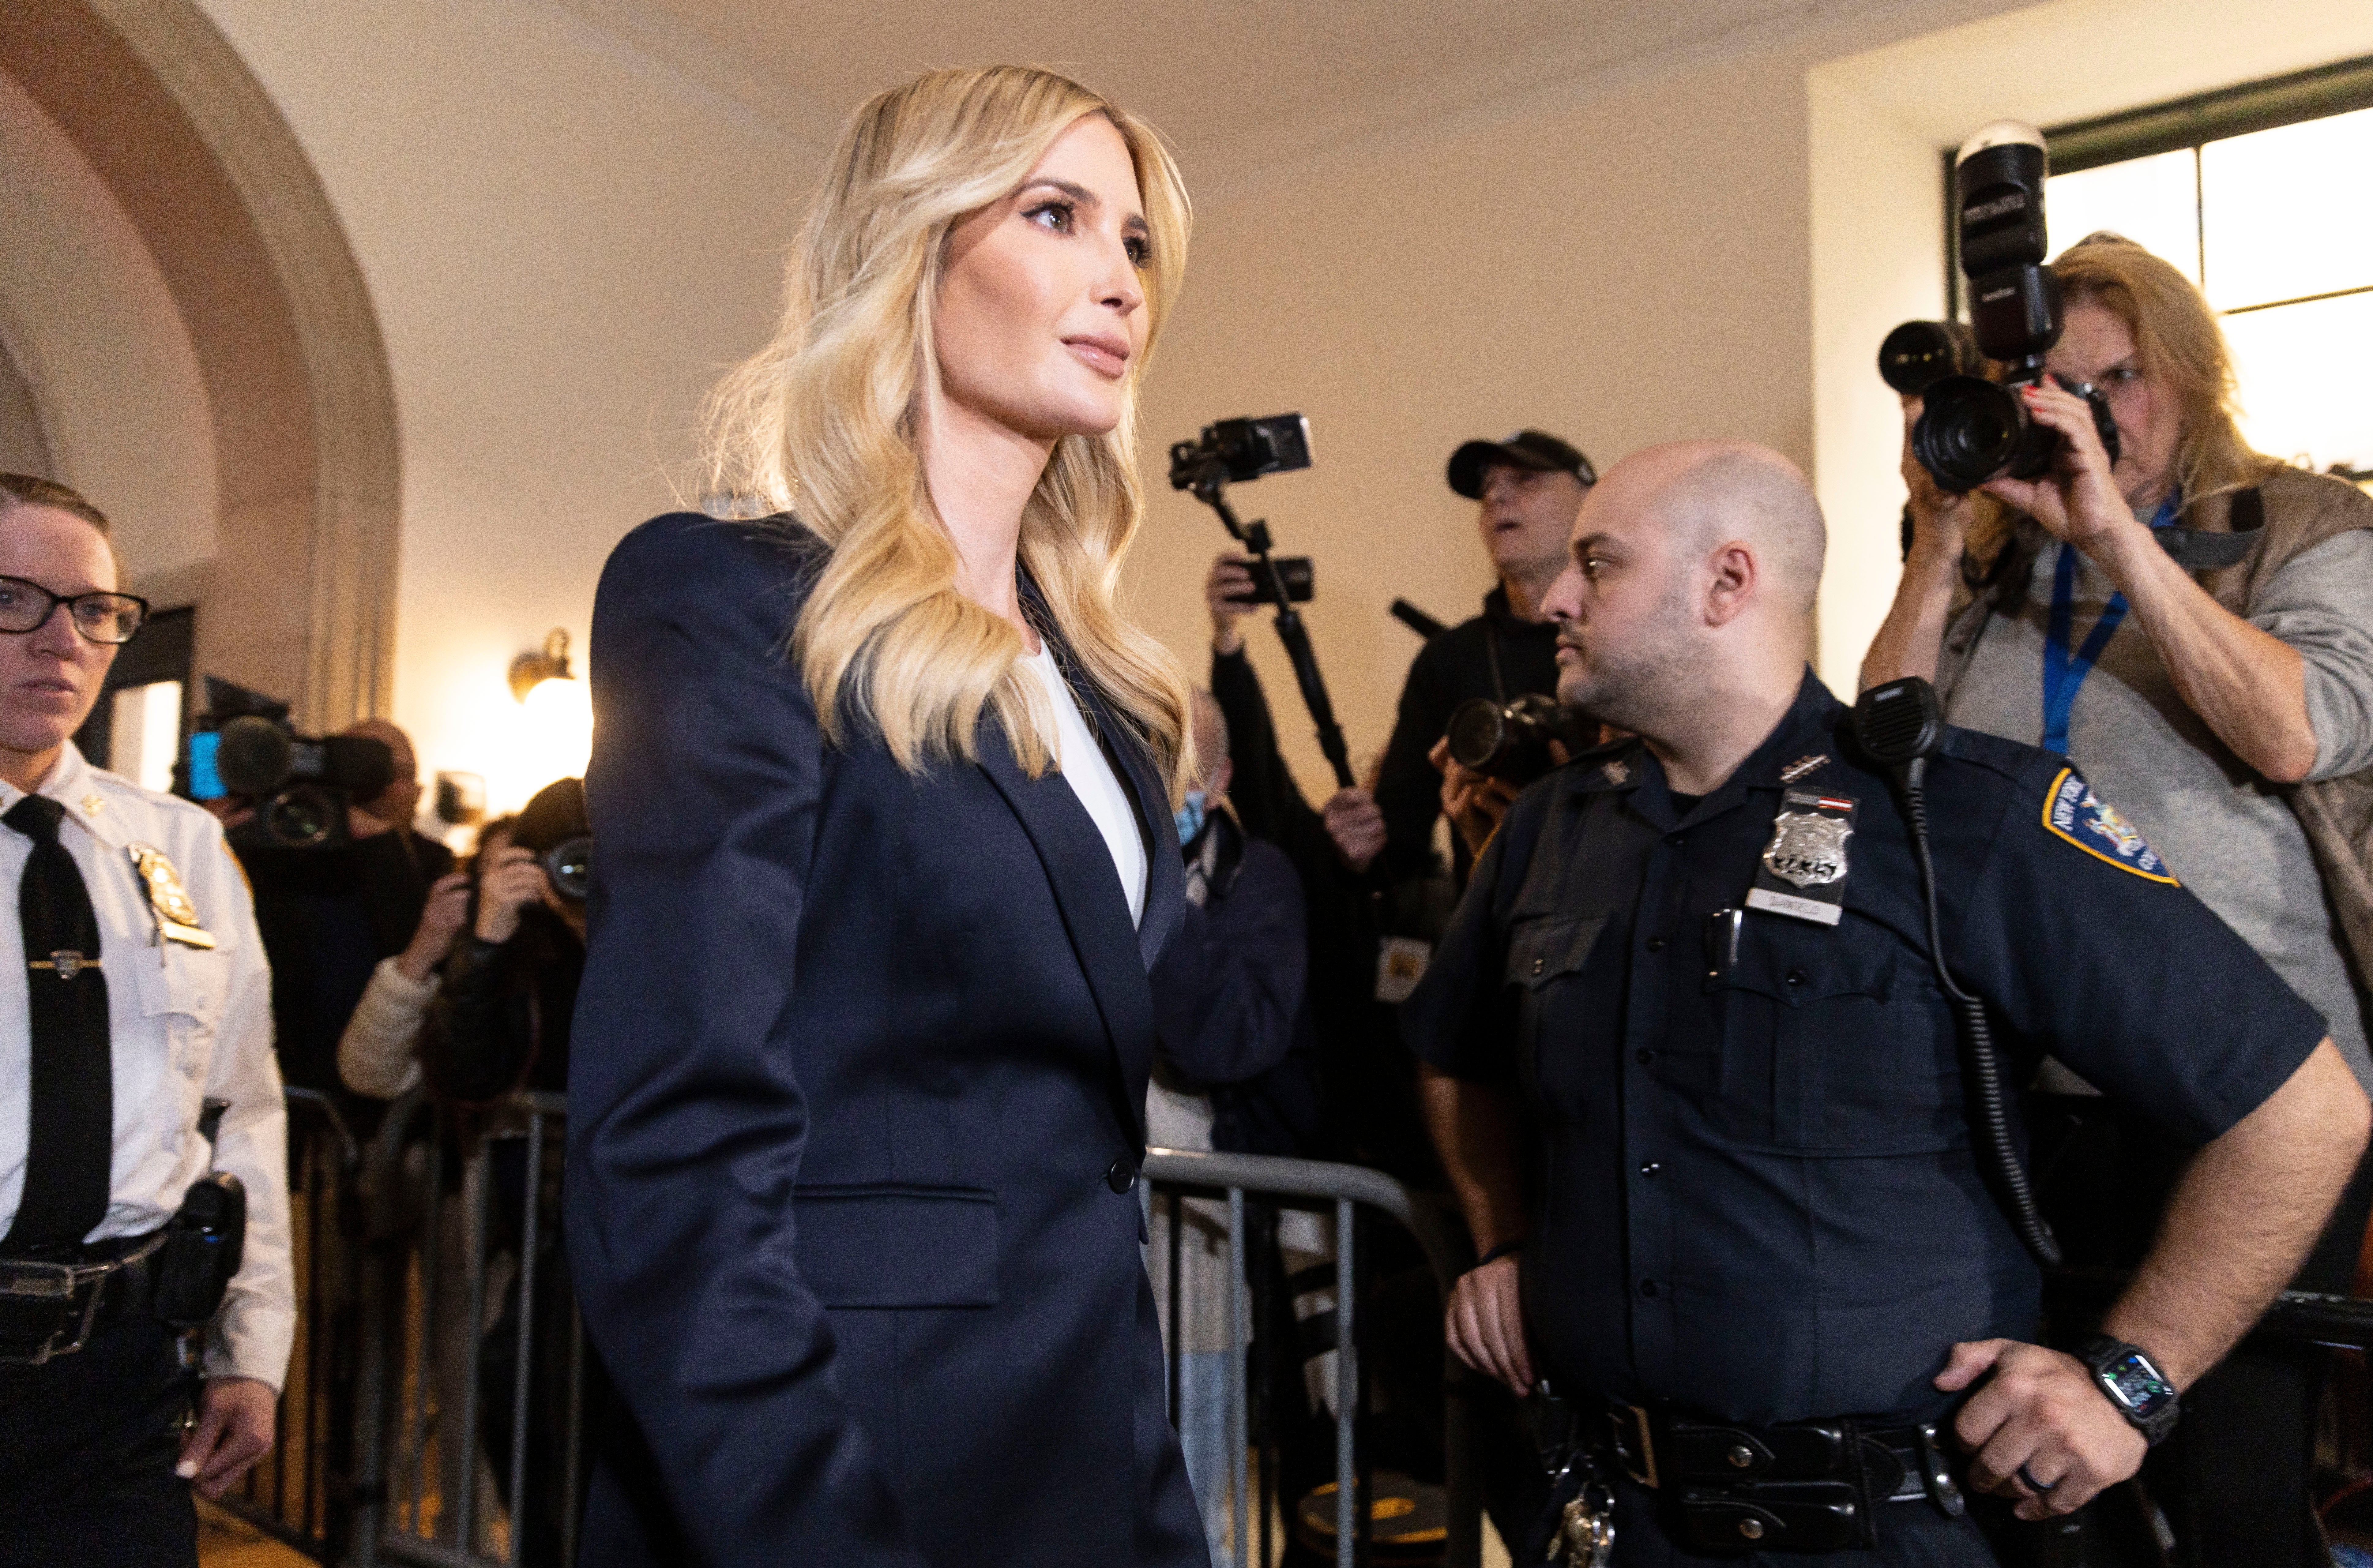 Ivanka Trump arrives at the doors of Judge Arthur Engoron’s courtroom on 8 November to testify in a fraud trial targeting her family’s business. Cameras are not allowed inside the courtroom